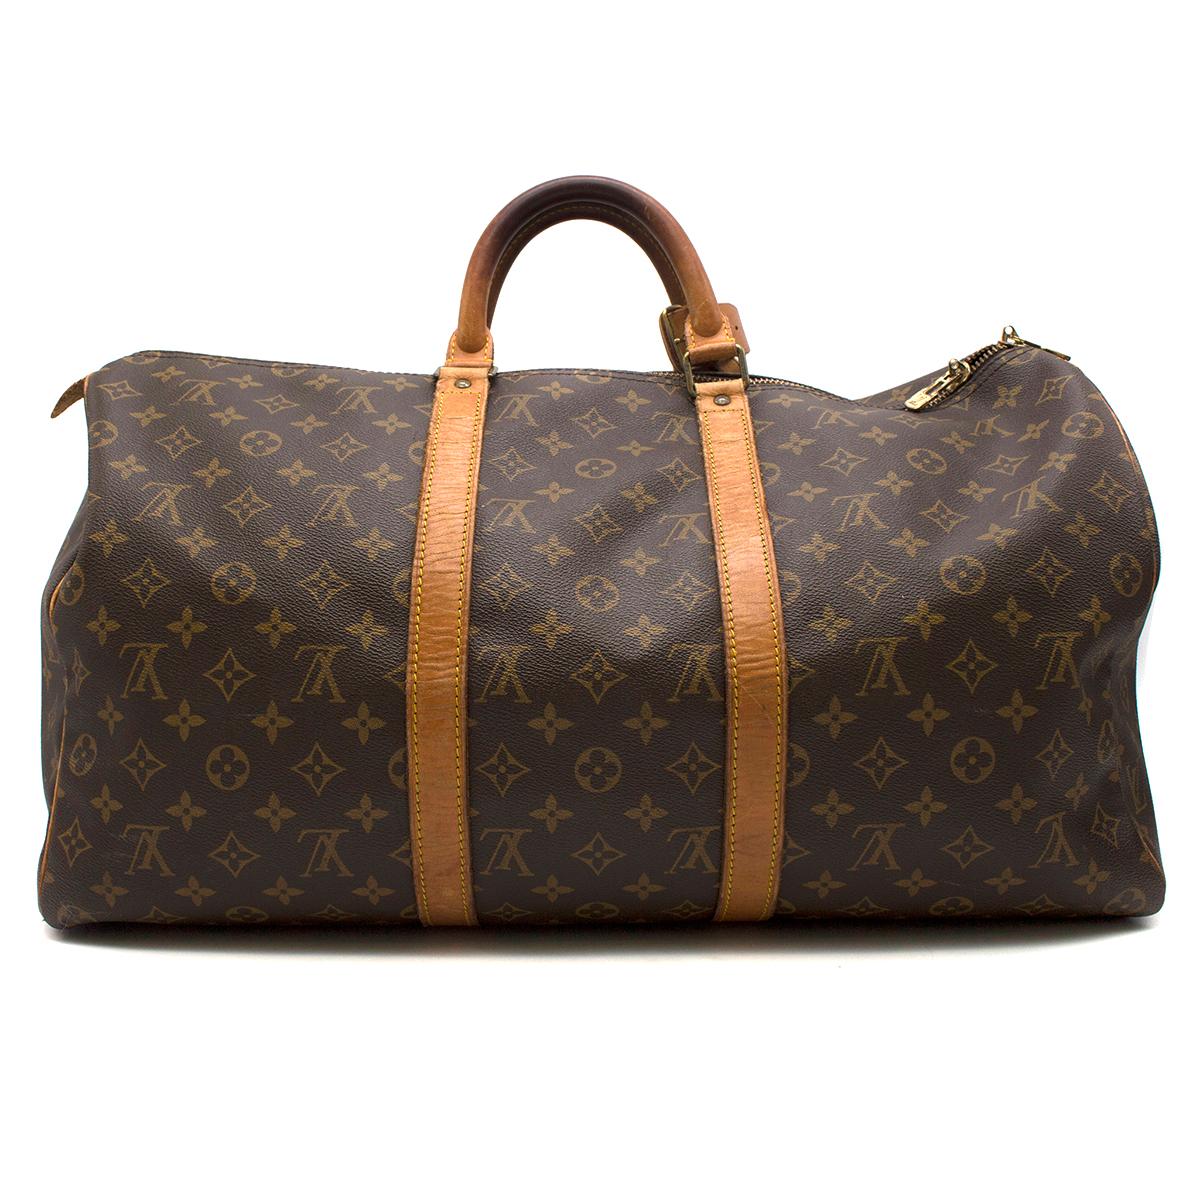 Louis Vuitton Keepall 50 Bandouliere bag

-Coated brown canvas
-Monogrammed signature Louis Vuitton pattern
-Zip closure 
-Rounded handles 
-Handle trimmings in natural leather
-Sophisticated hand carry
-Gold tone hardware
-Interior canvas